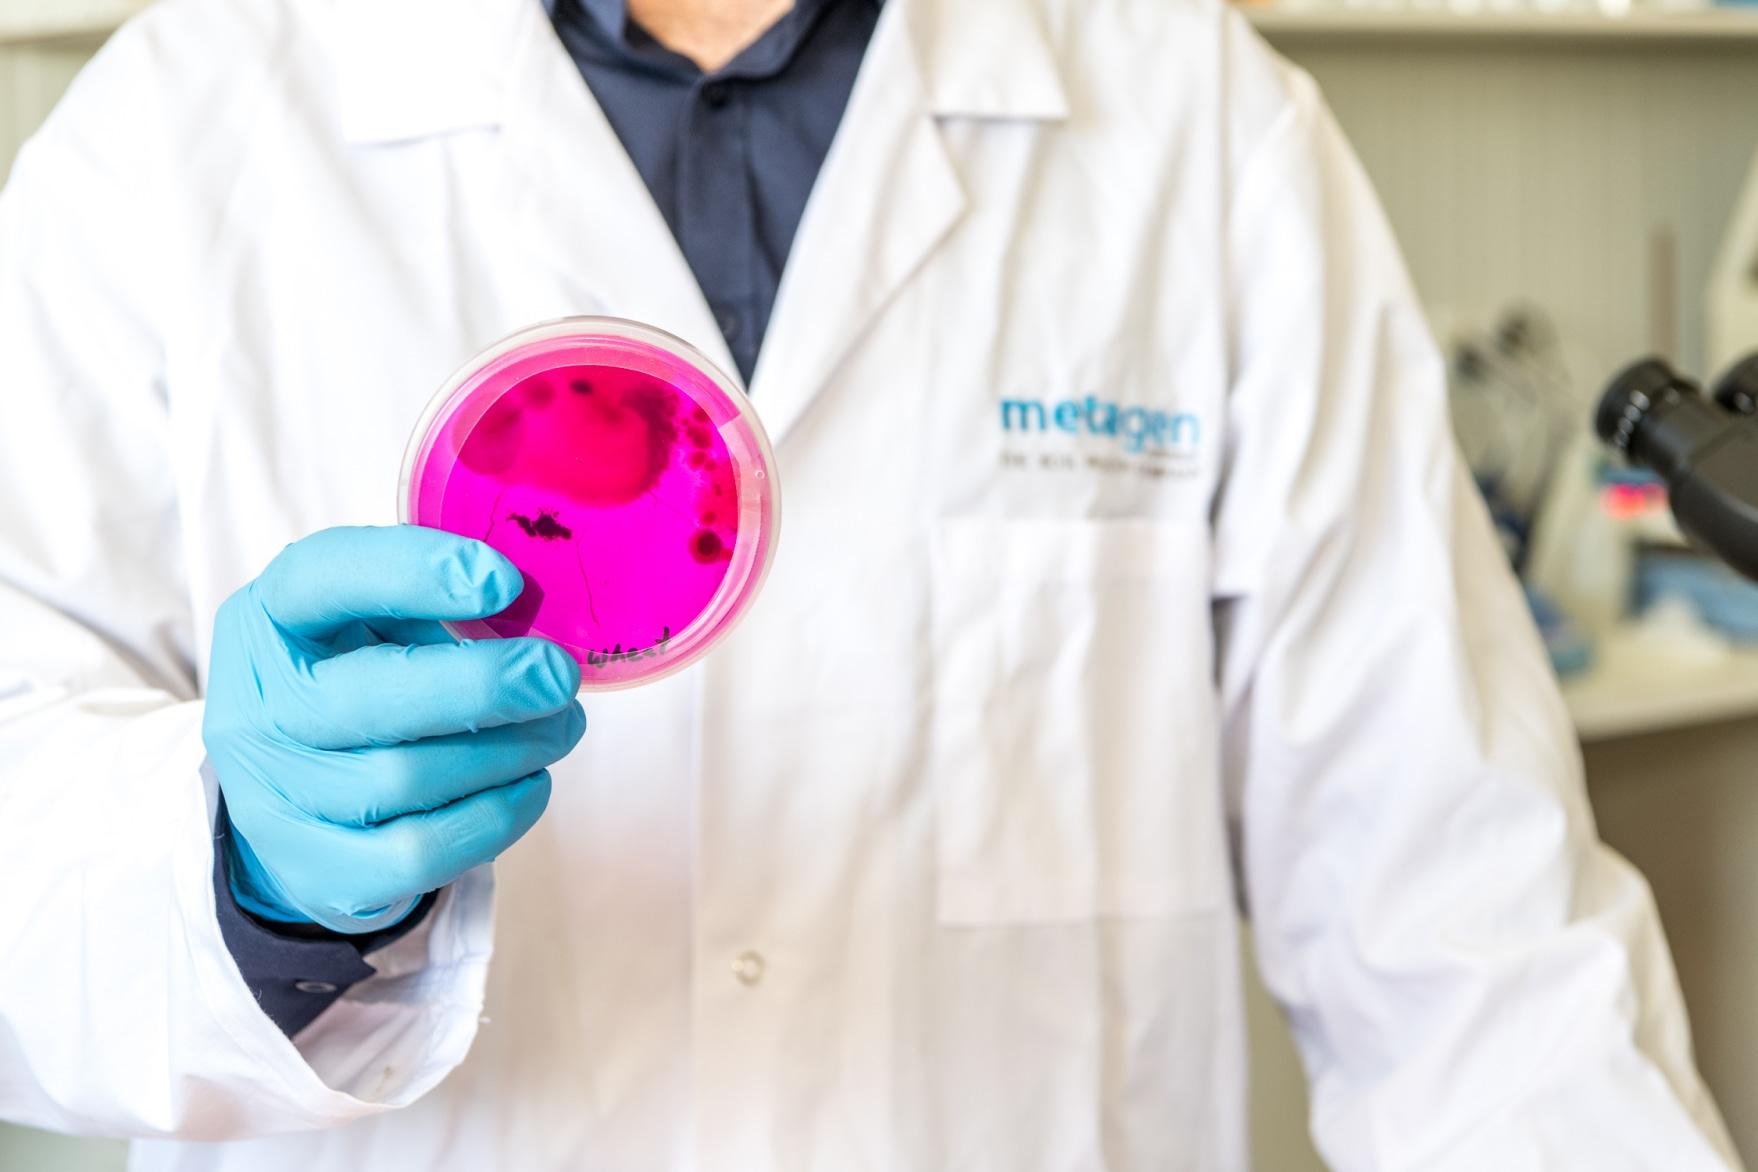 A hand holding a petri dish with pink gel